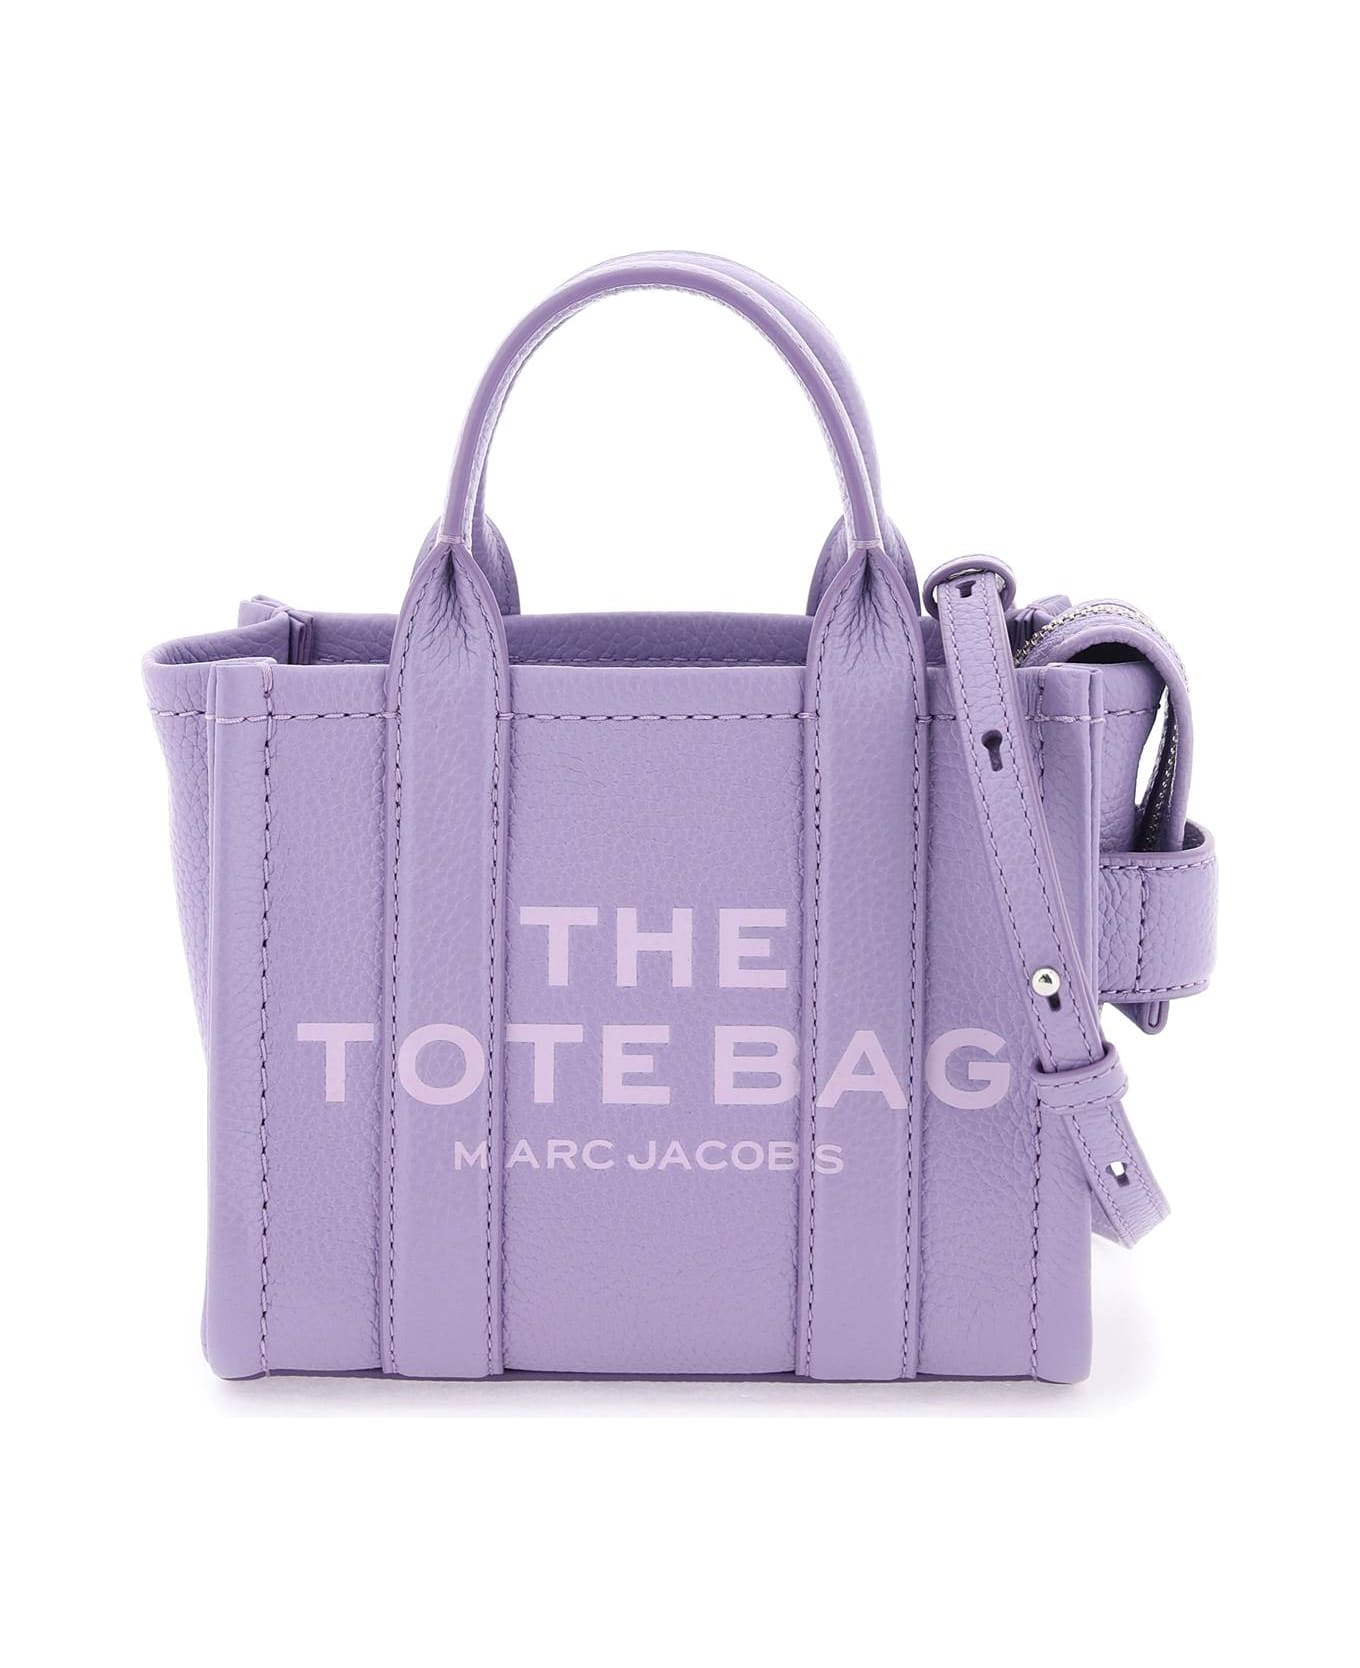 Marc Jacobs The Leather Tote Bag - LAVENDER (Purple)